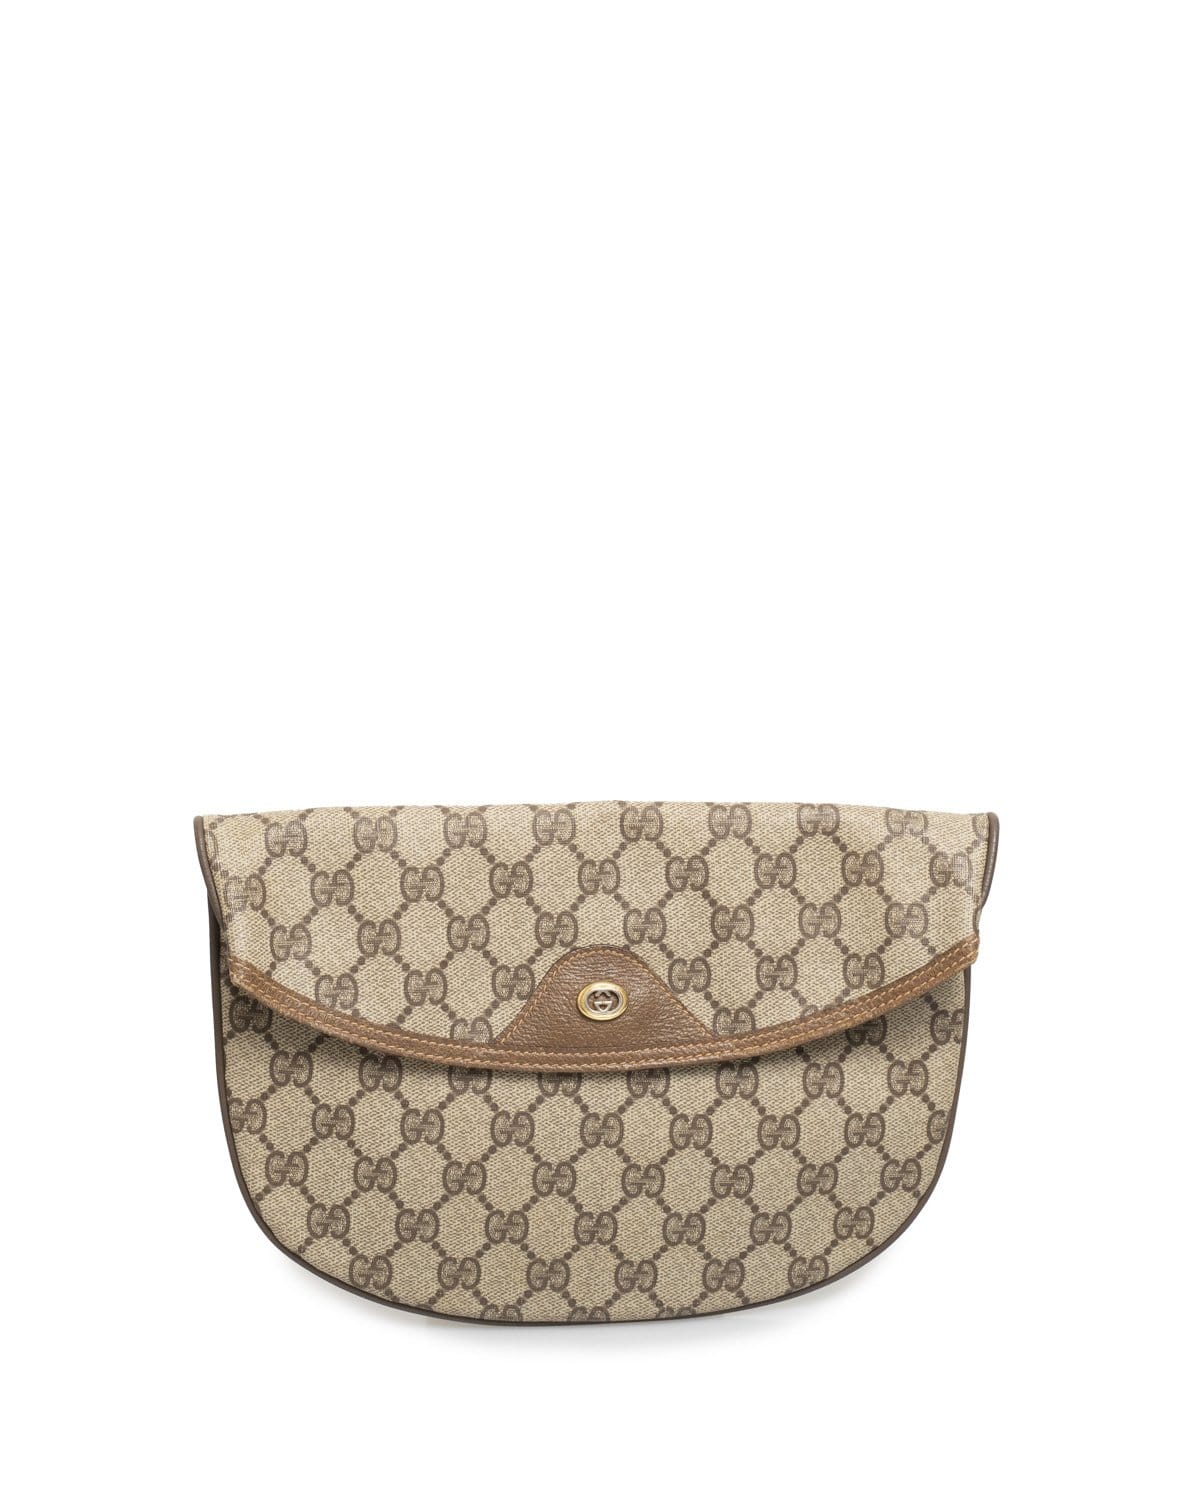 Gucci Gucci Vintage Supreme Monogram Oval Clutch Style Pouch- AWL2024